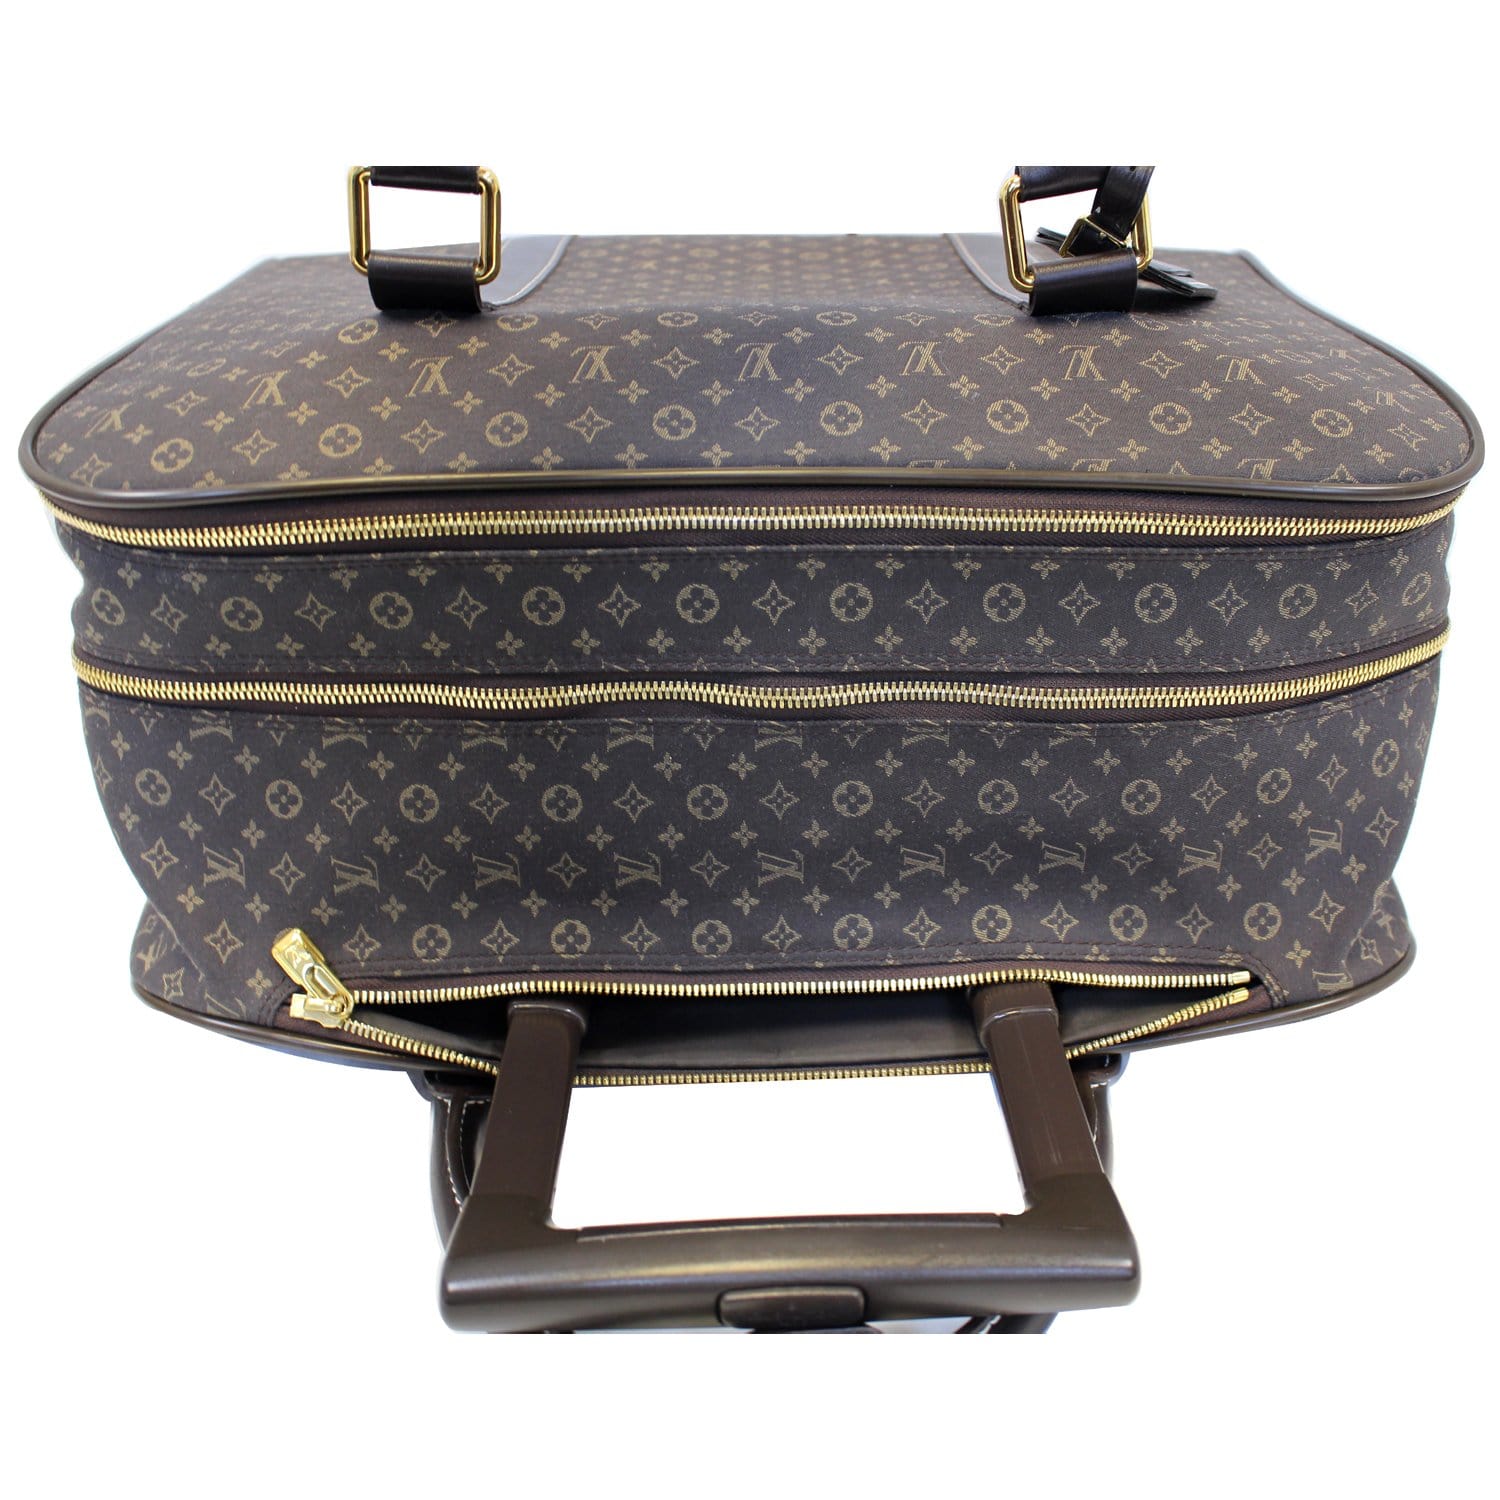 Louis Vuitton Carry-On Bag ''Trolley 45'' Monogram size H17 x W13 x D7 in